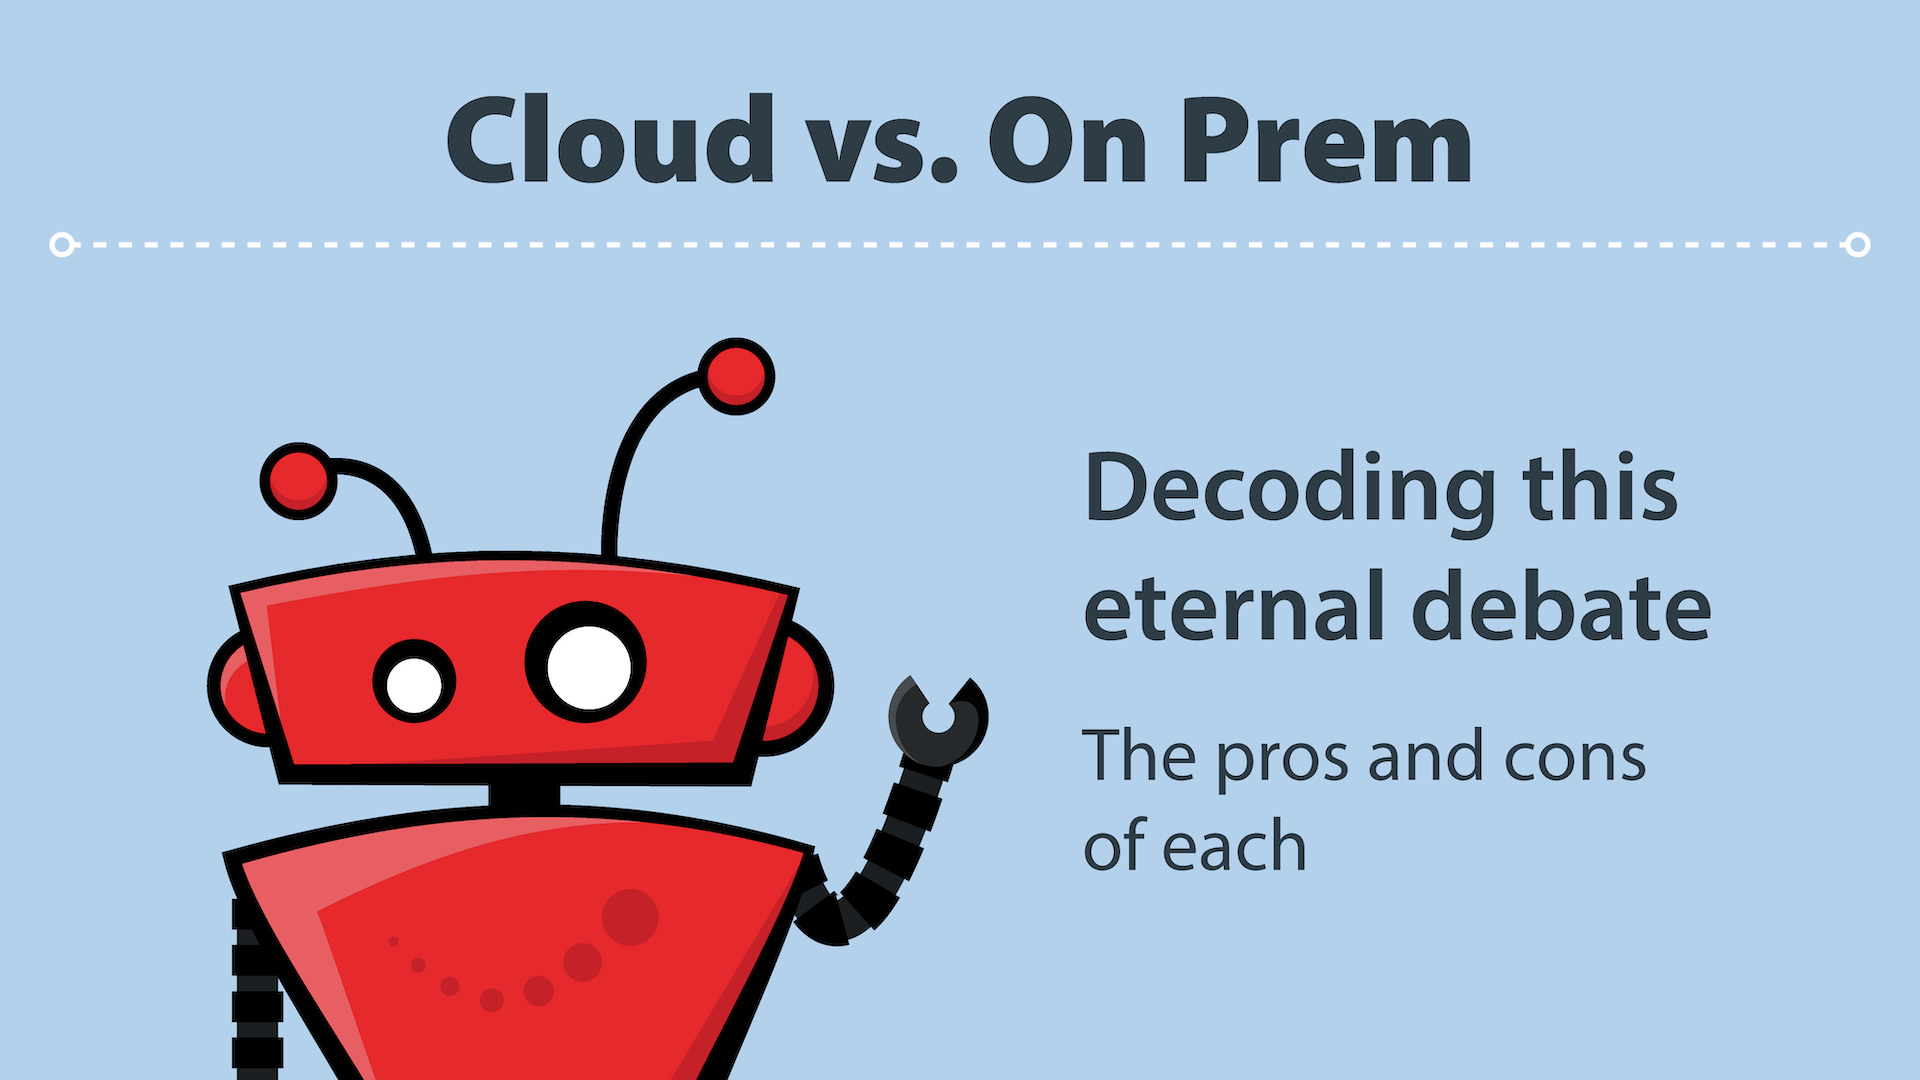 xBert robot on a light blue background. Its left arm is raised like it's waving. The title text is "Cloud vs. On Prem" with a subheading that reads "Decoding this eternal debate. The pros and cons of each"